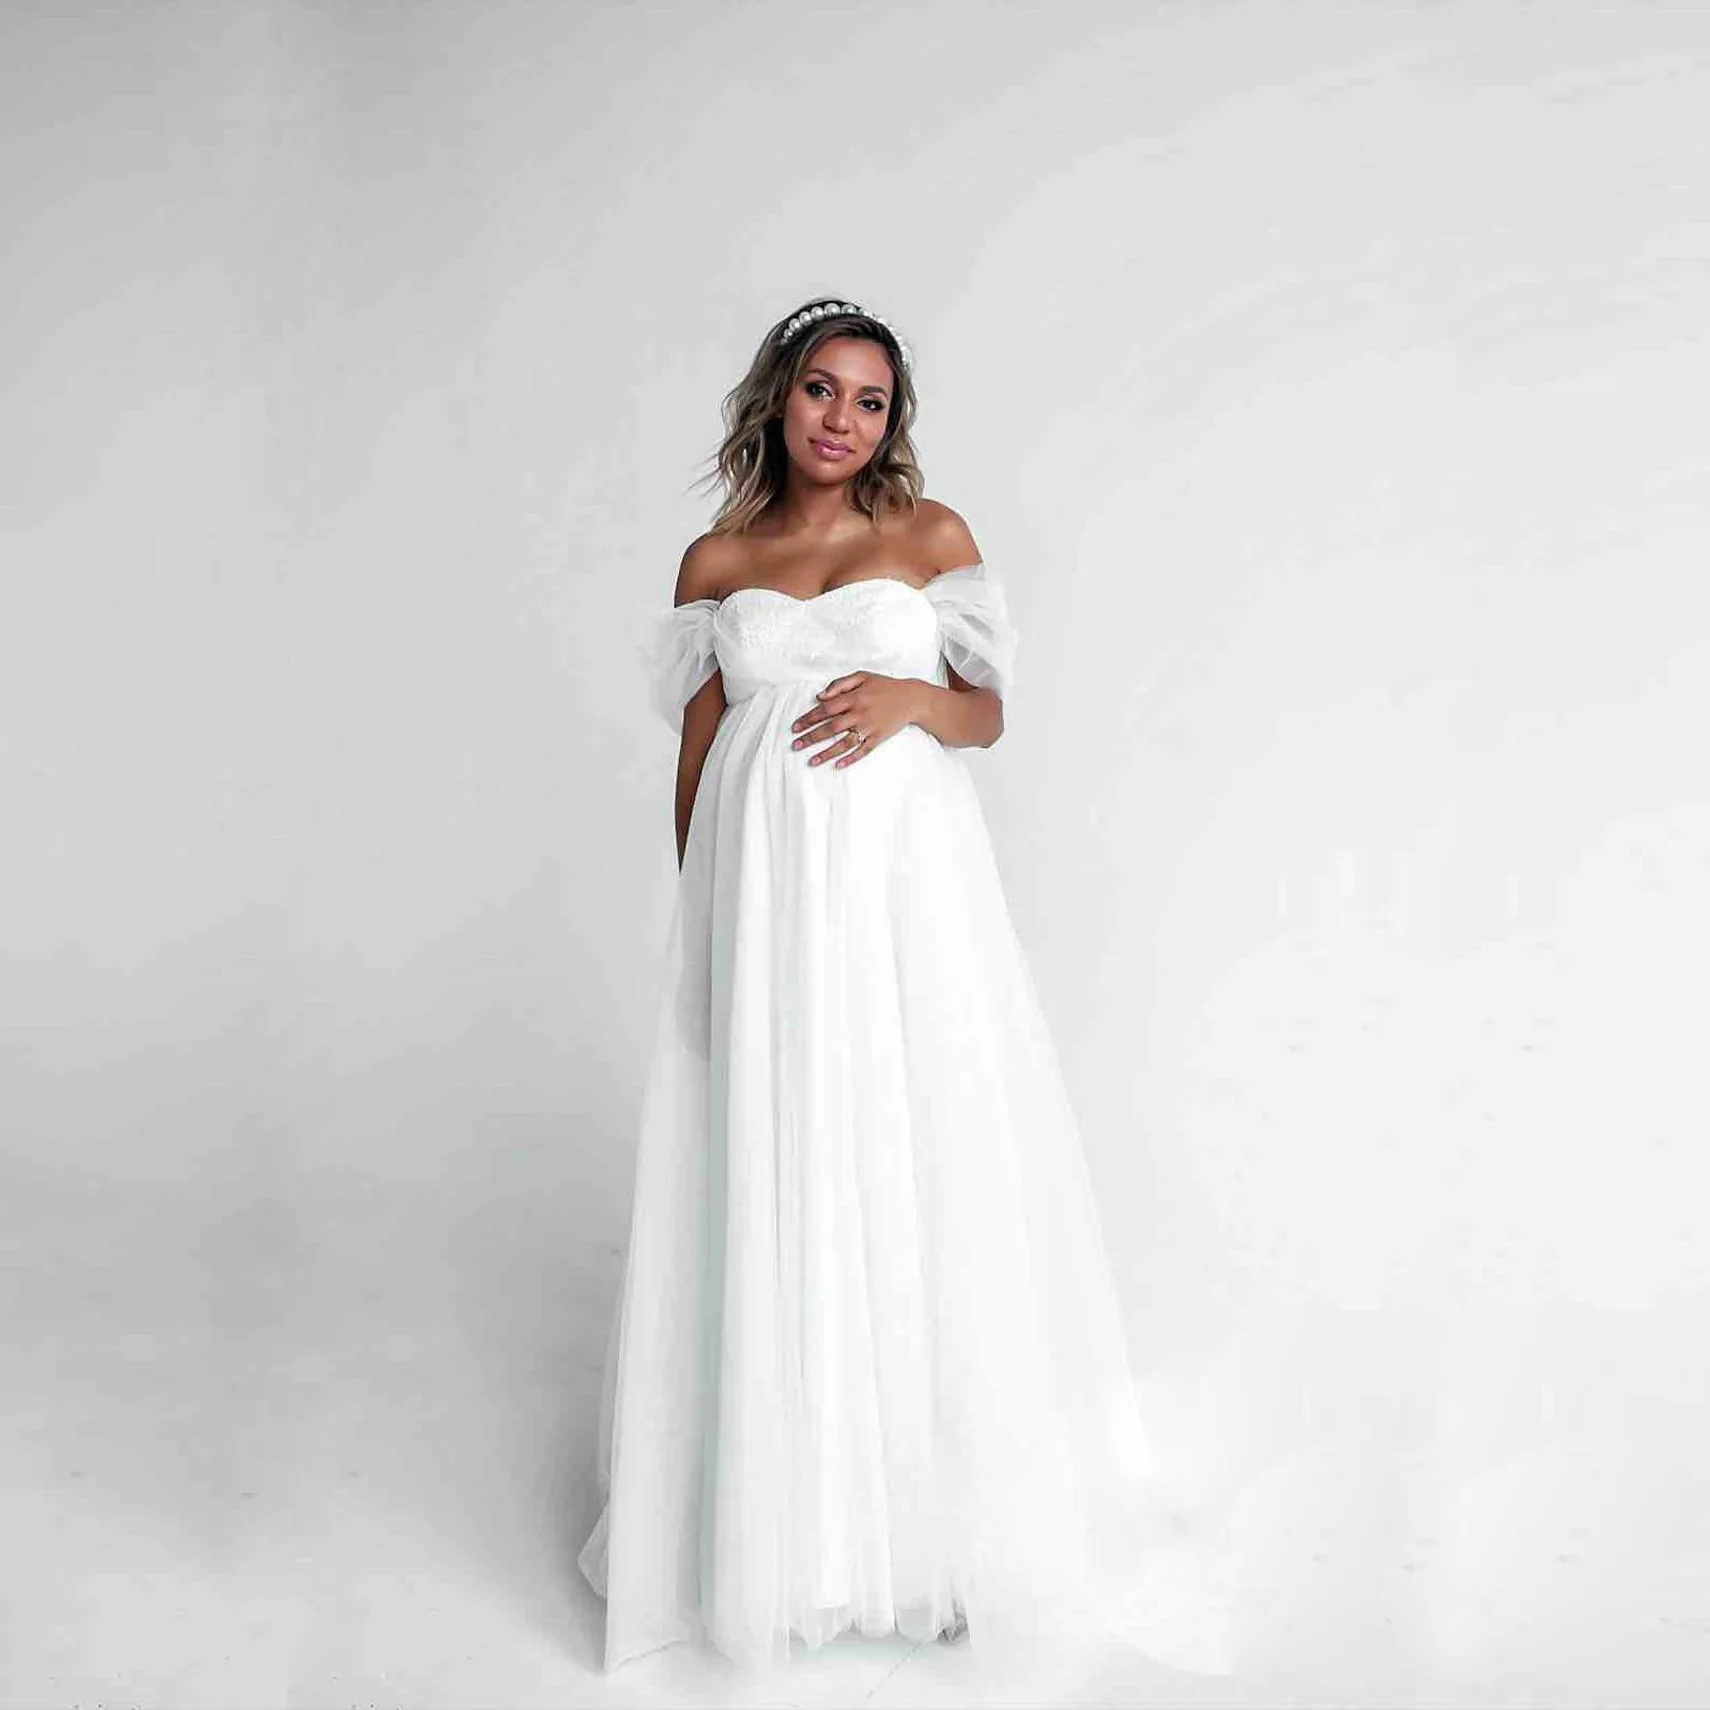 

Chiffon Maternity Dress For Photoshoot Flowy Off Shoulder Lace Photography Gown Baby Shower Pregnant Wedding Bride Dress